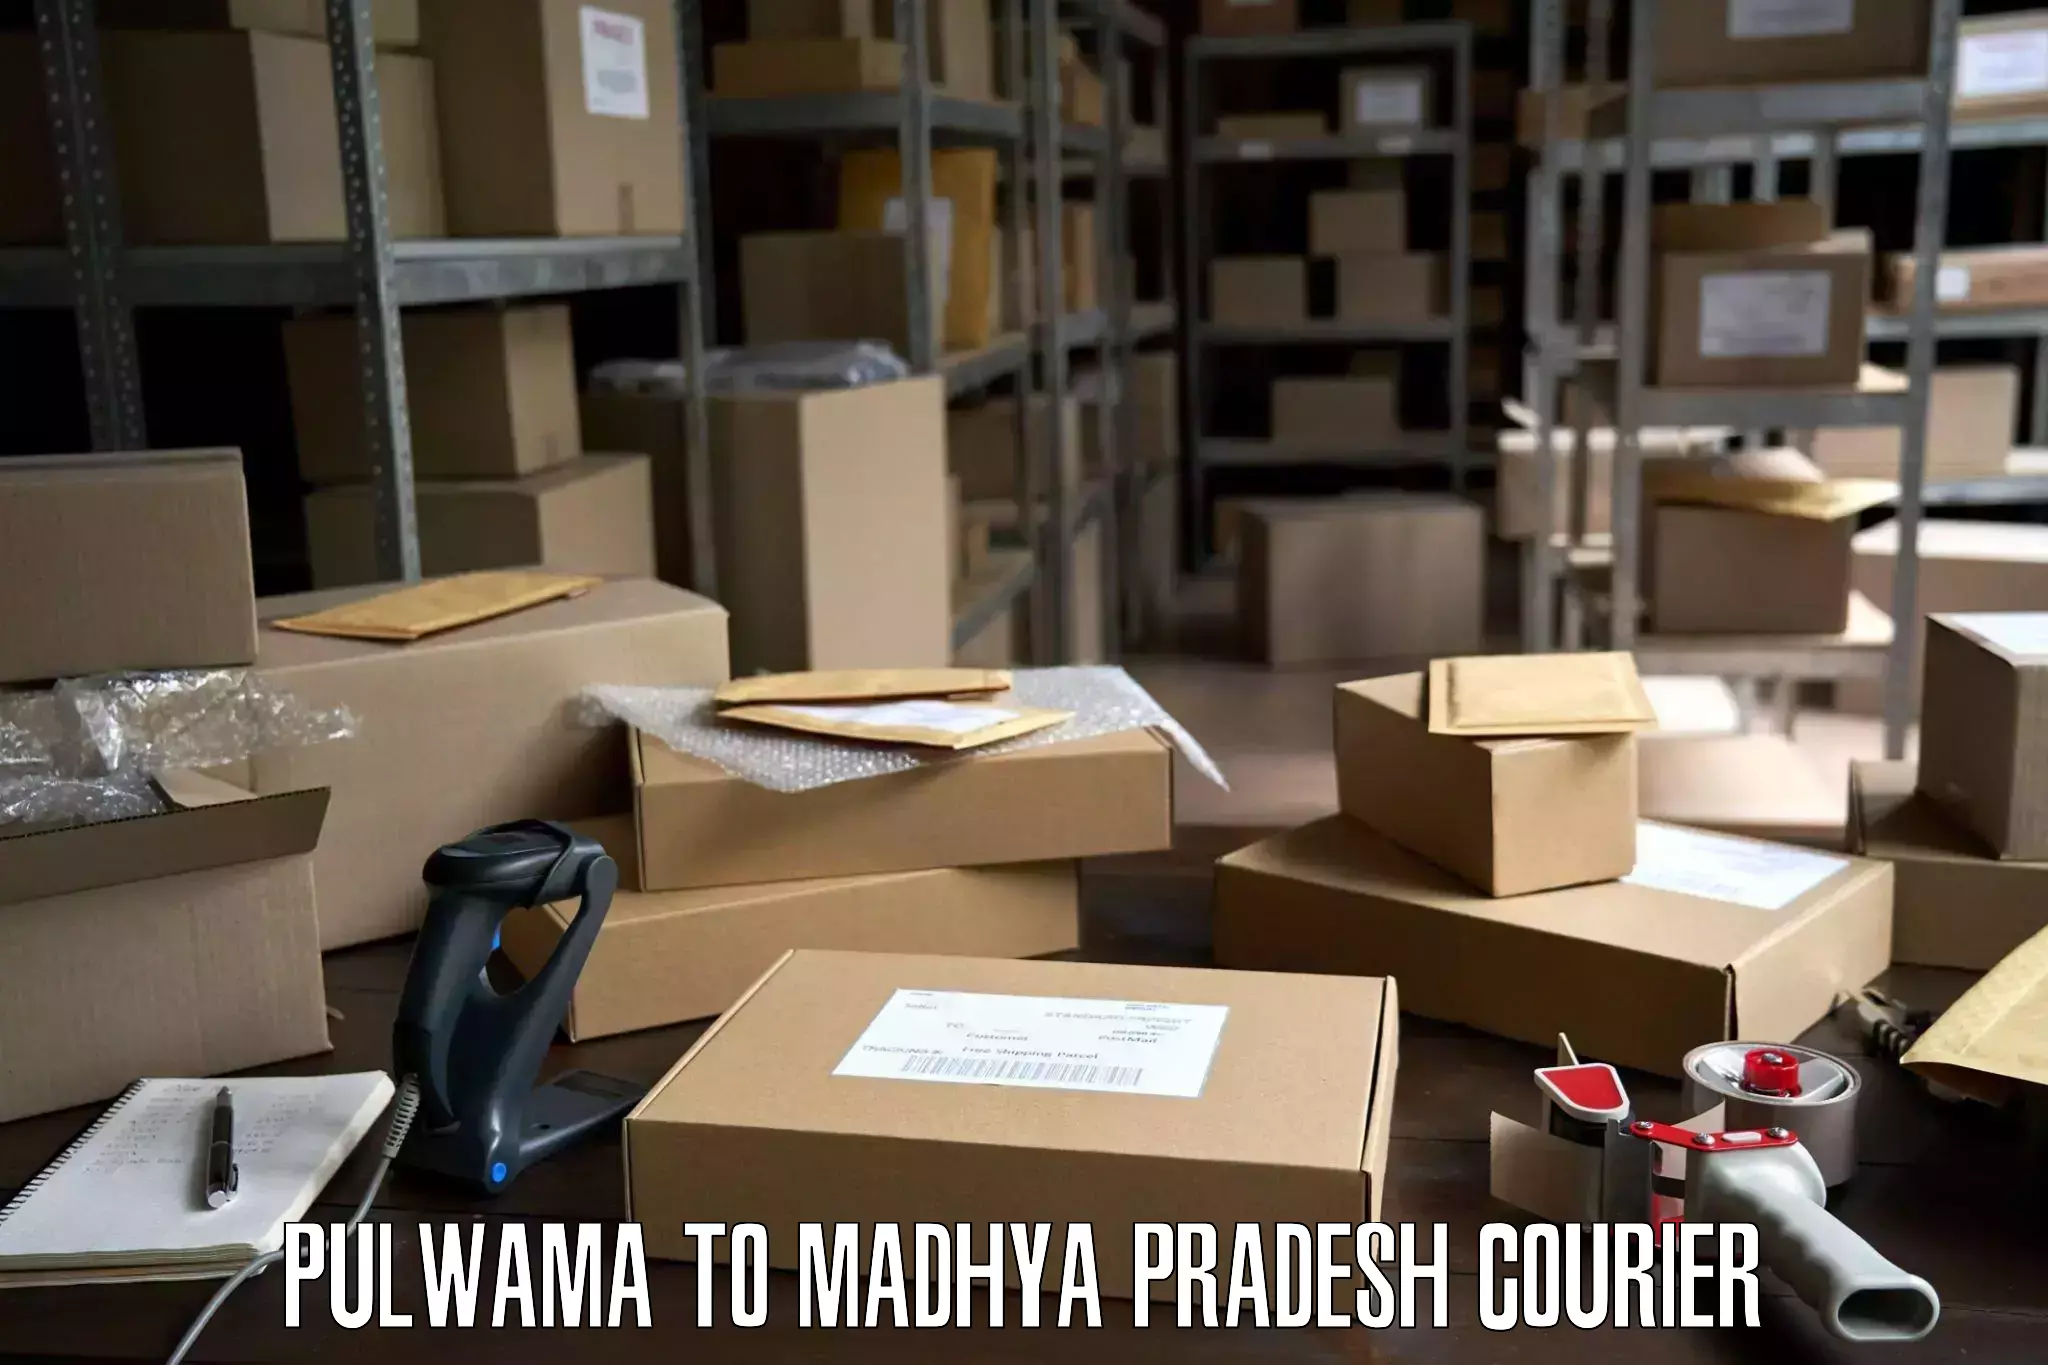 Professional moving company Pulwama to Indore